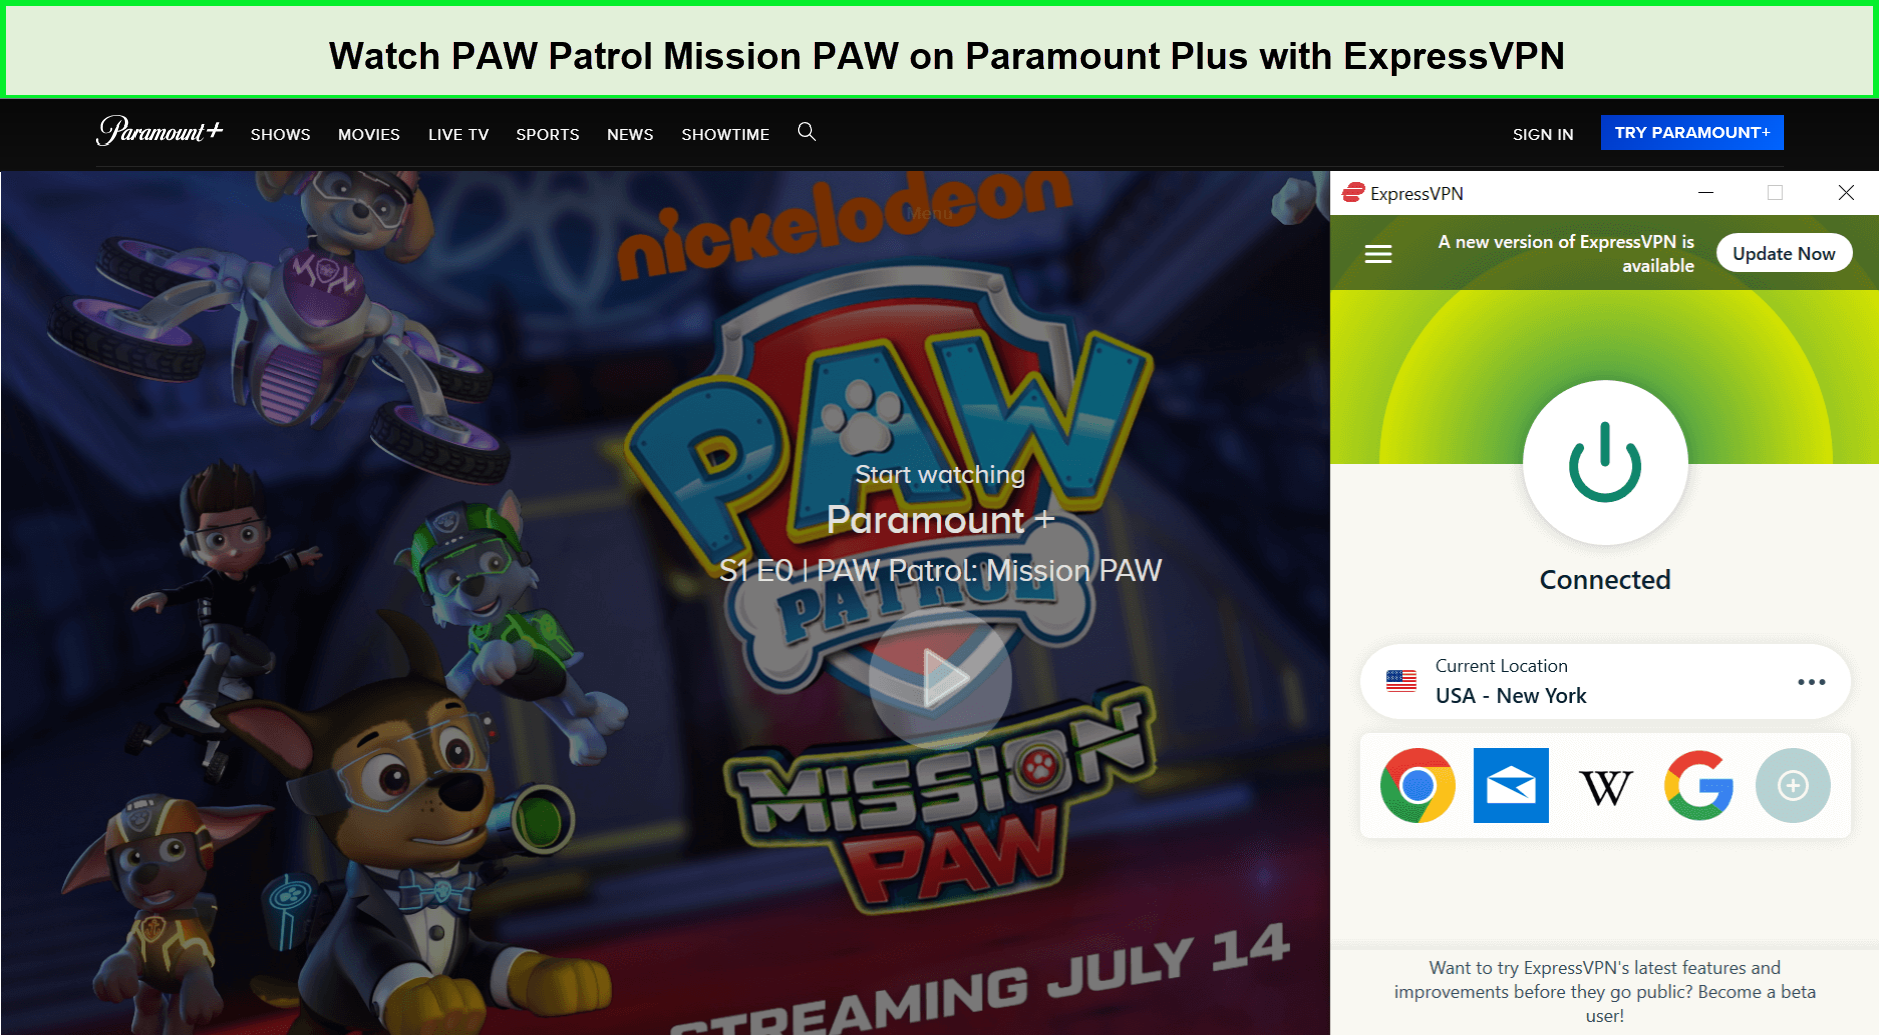 Watch-PAW-Patrol-Mission-PAW-in-UK-on-Paramount-Plus-with-ExpressVPN